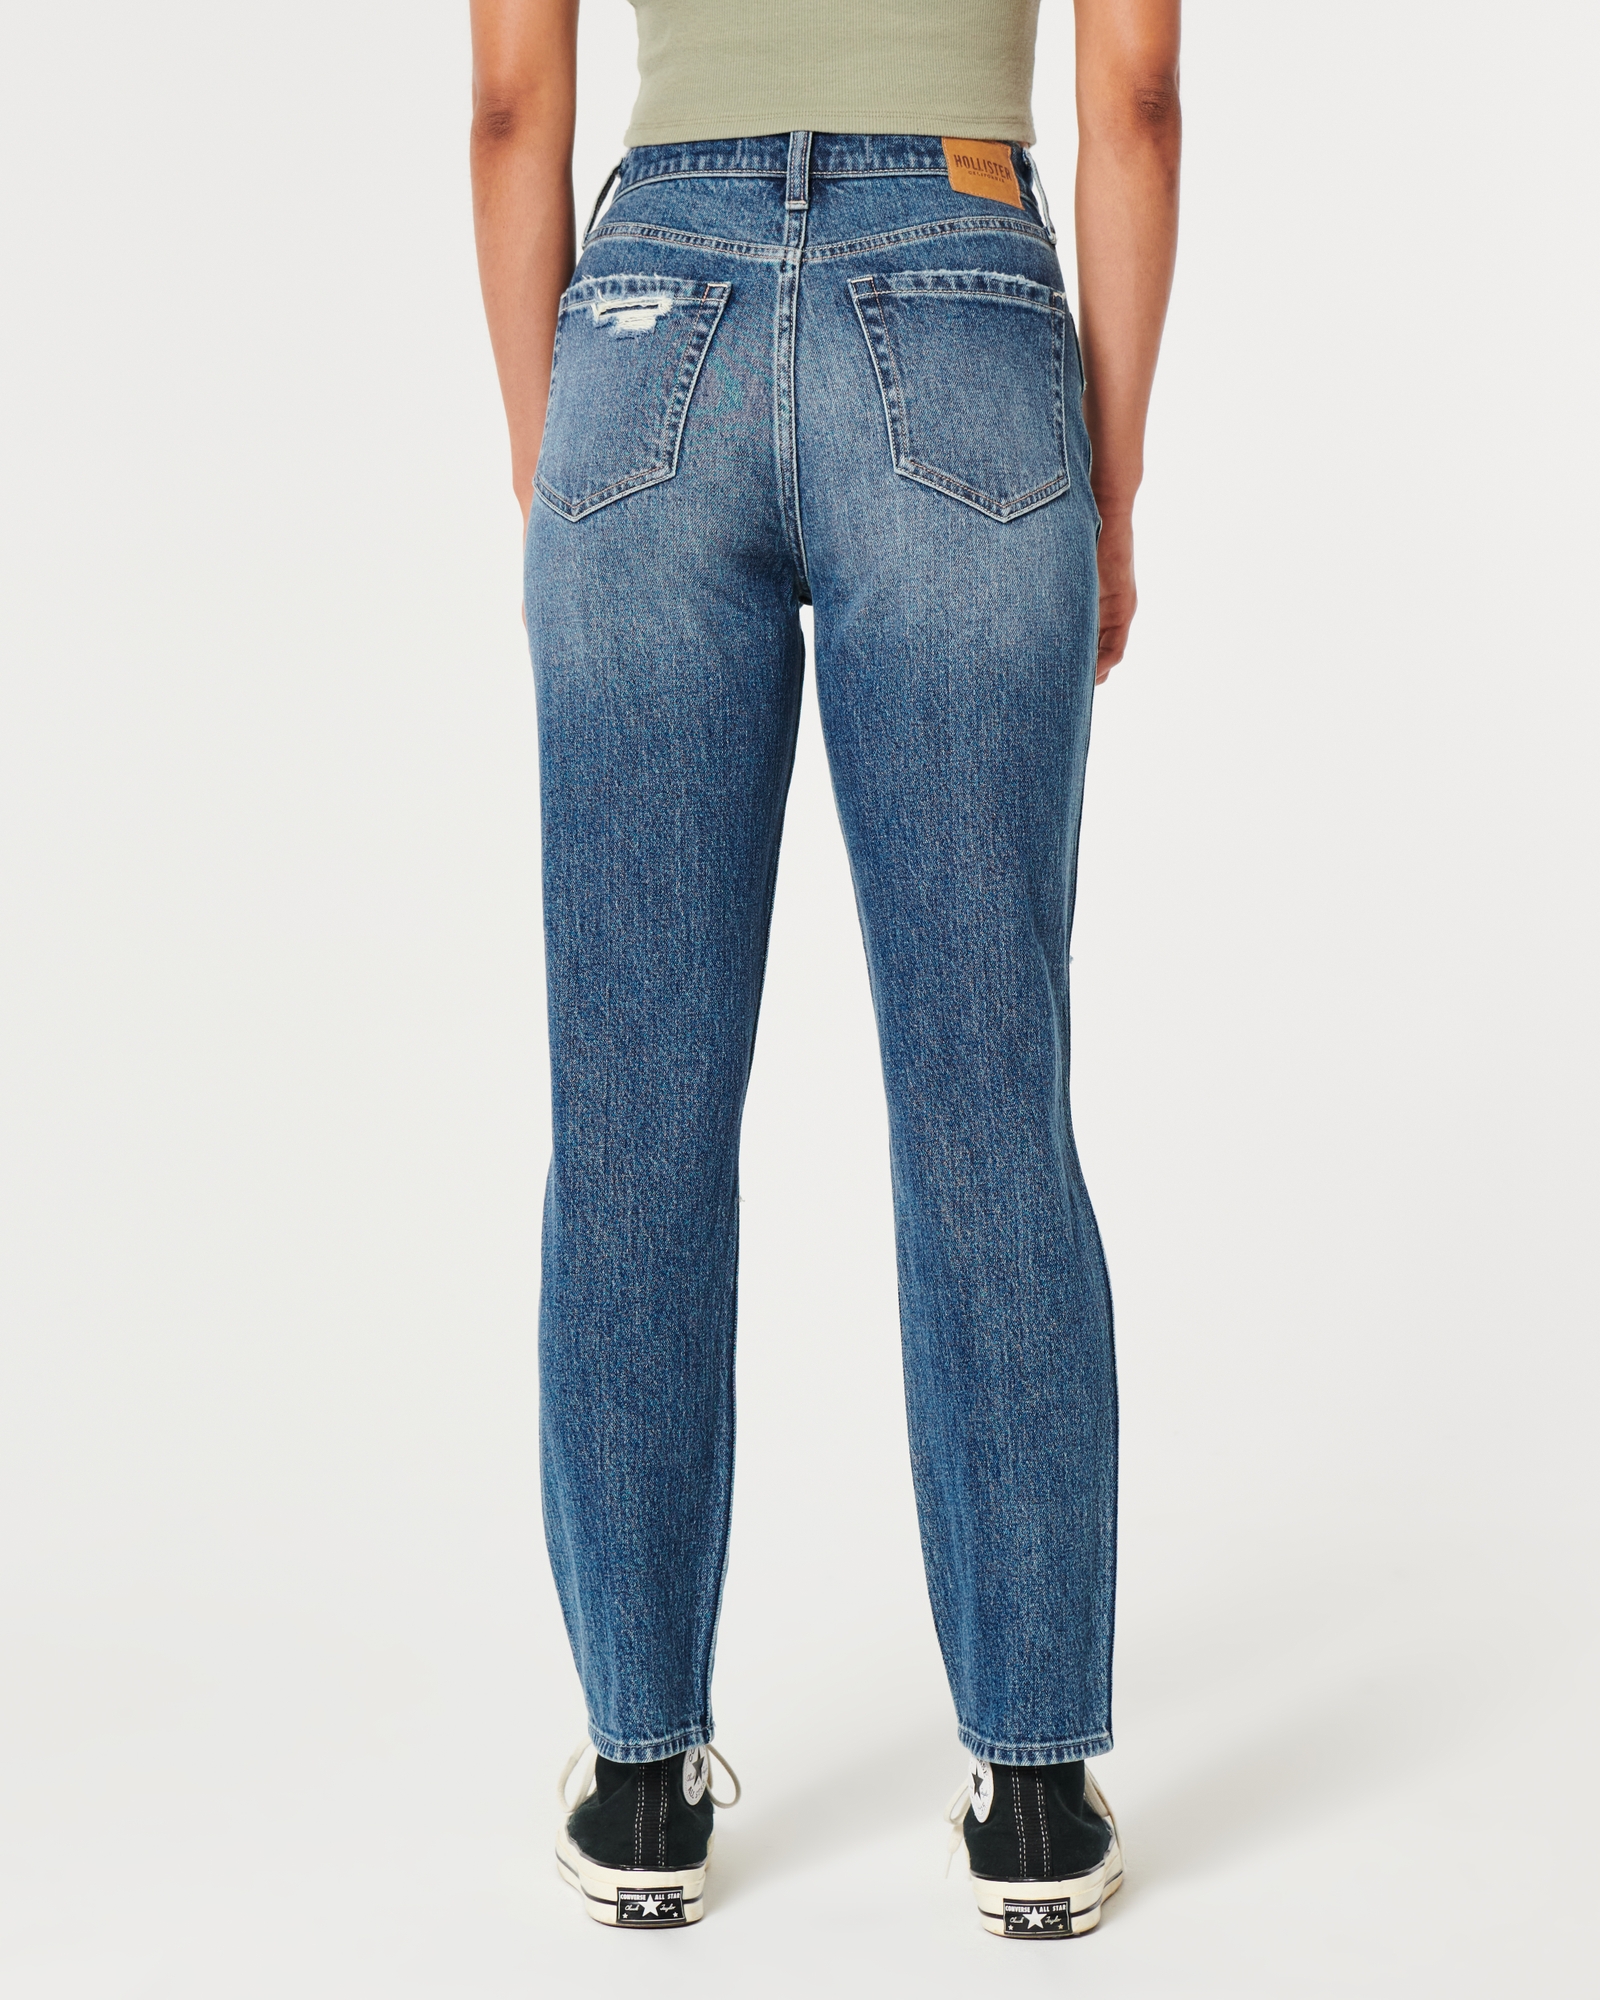 Hollister Ultra High-Rise Mom Jeans Blue Size 26 - $22 - From scout